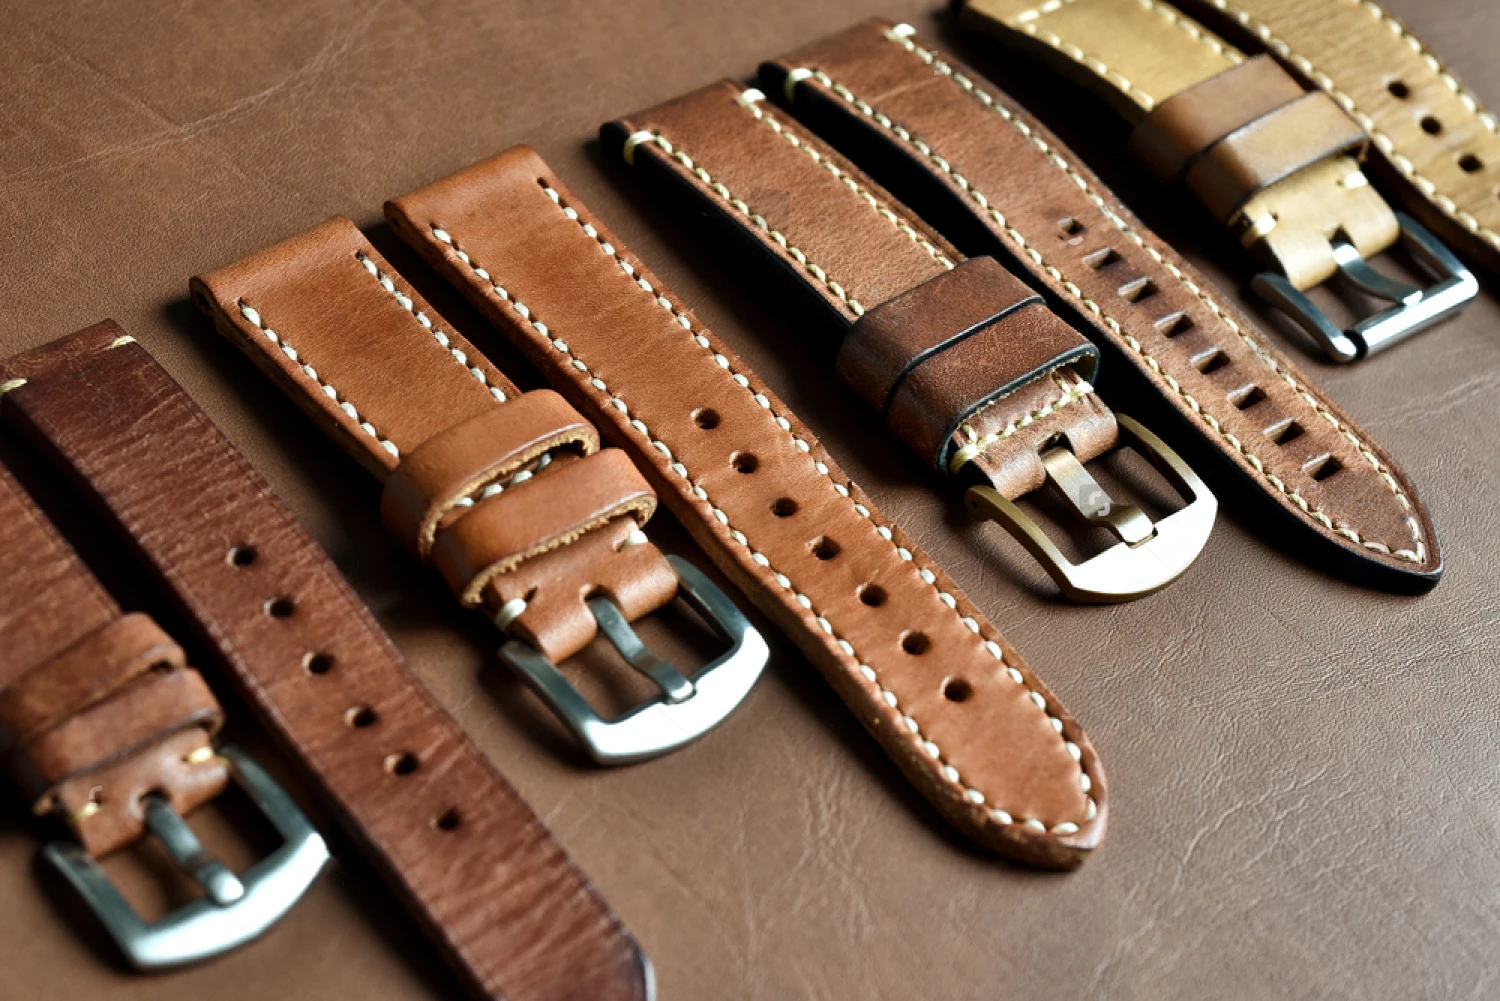 leather watch band strap compatible with all model h-a-m-i-l-t-o-n khaki field brown/green/black/navy rub strap 20MM watch belt enlarge